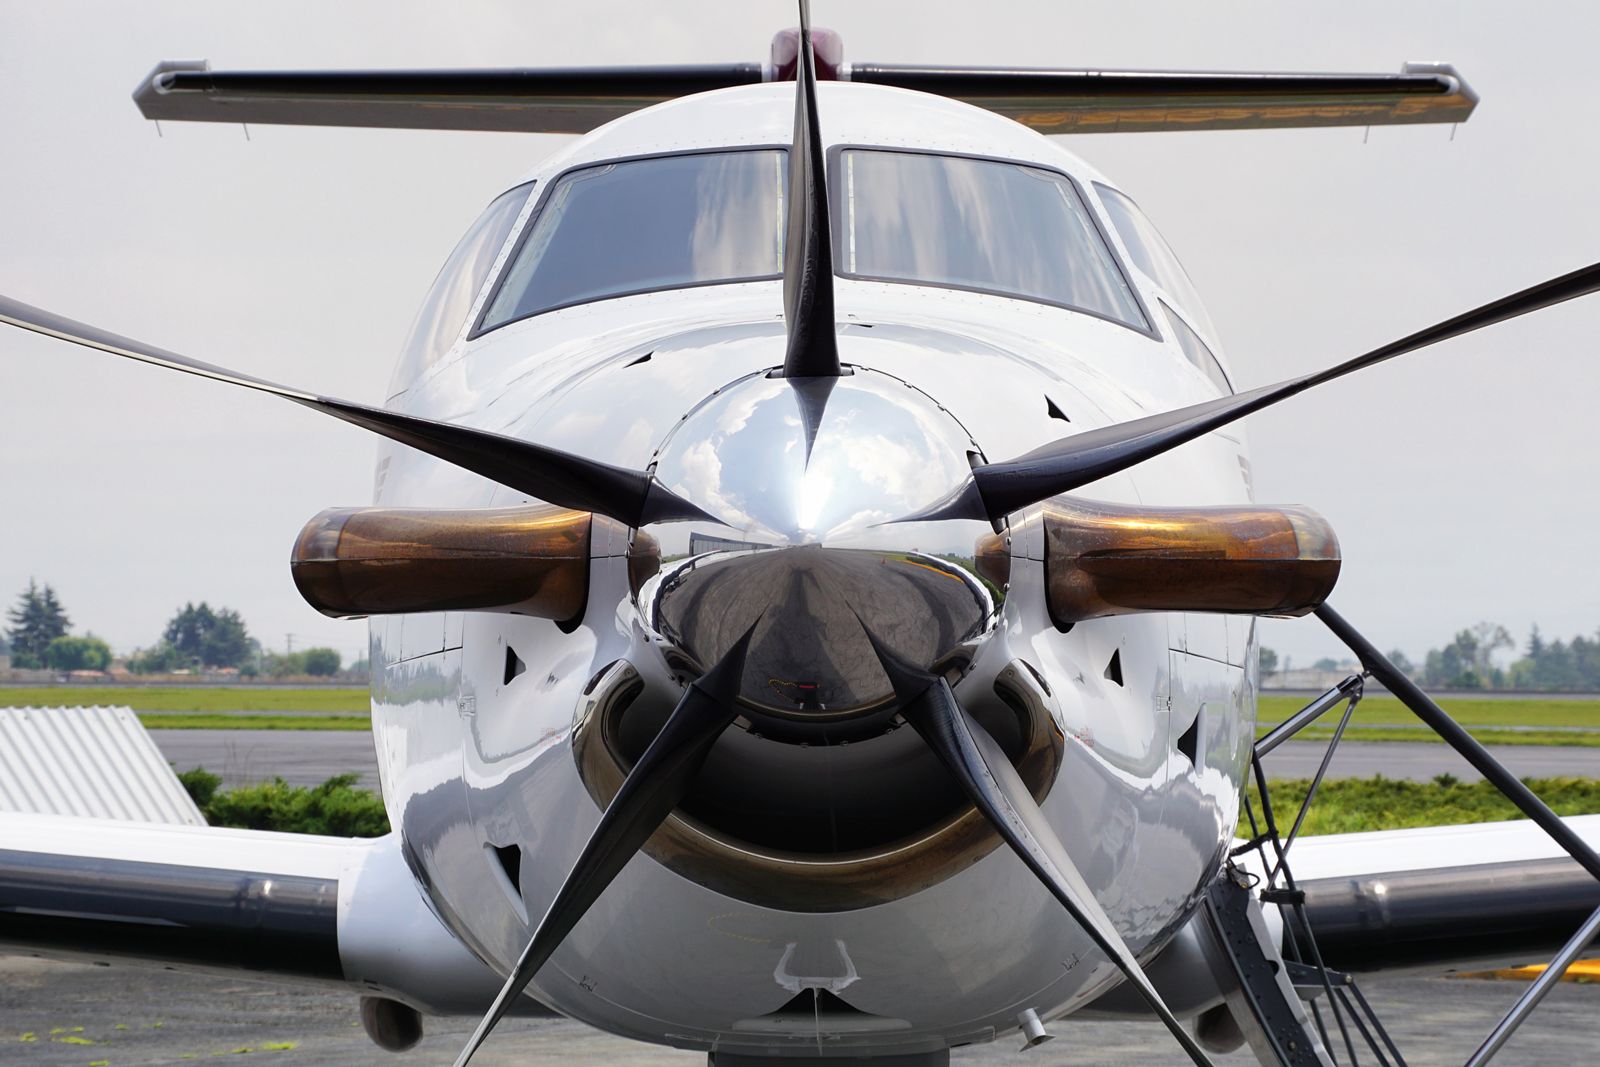 Pilatus PC-12 NG  S/N 1690 for sale | gallery image: /userfiles/images/PC12NG_sn1690/dsc04731.jpg